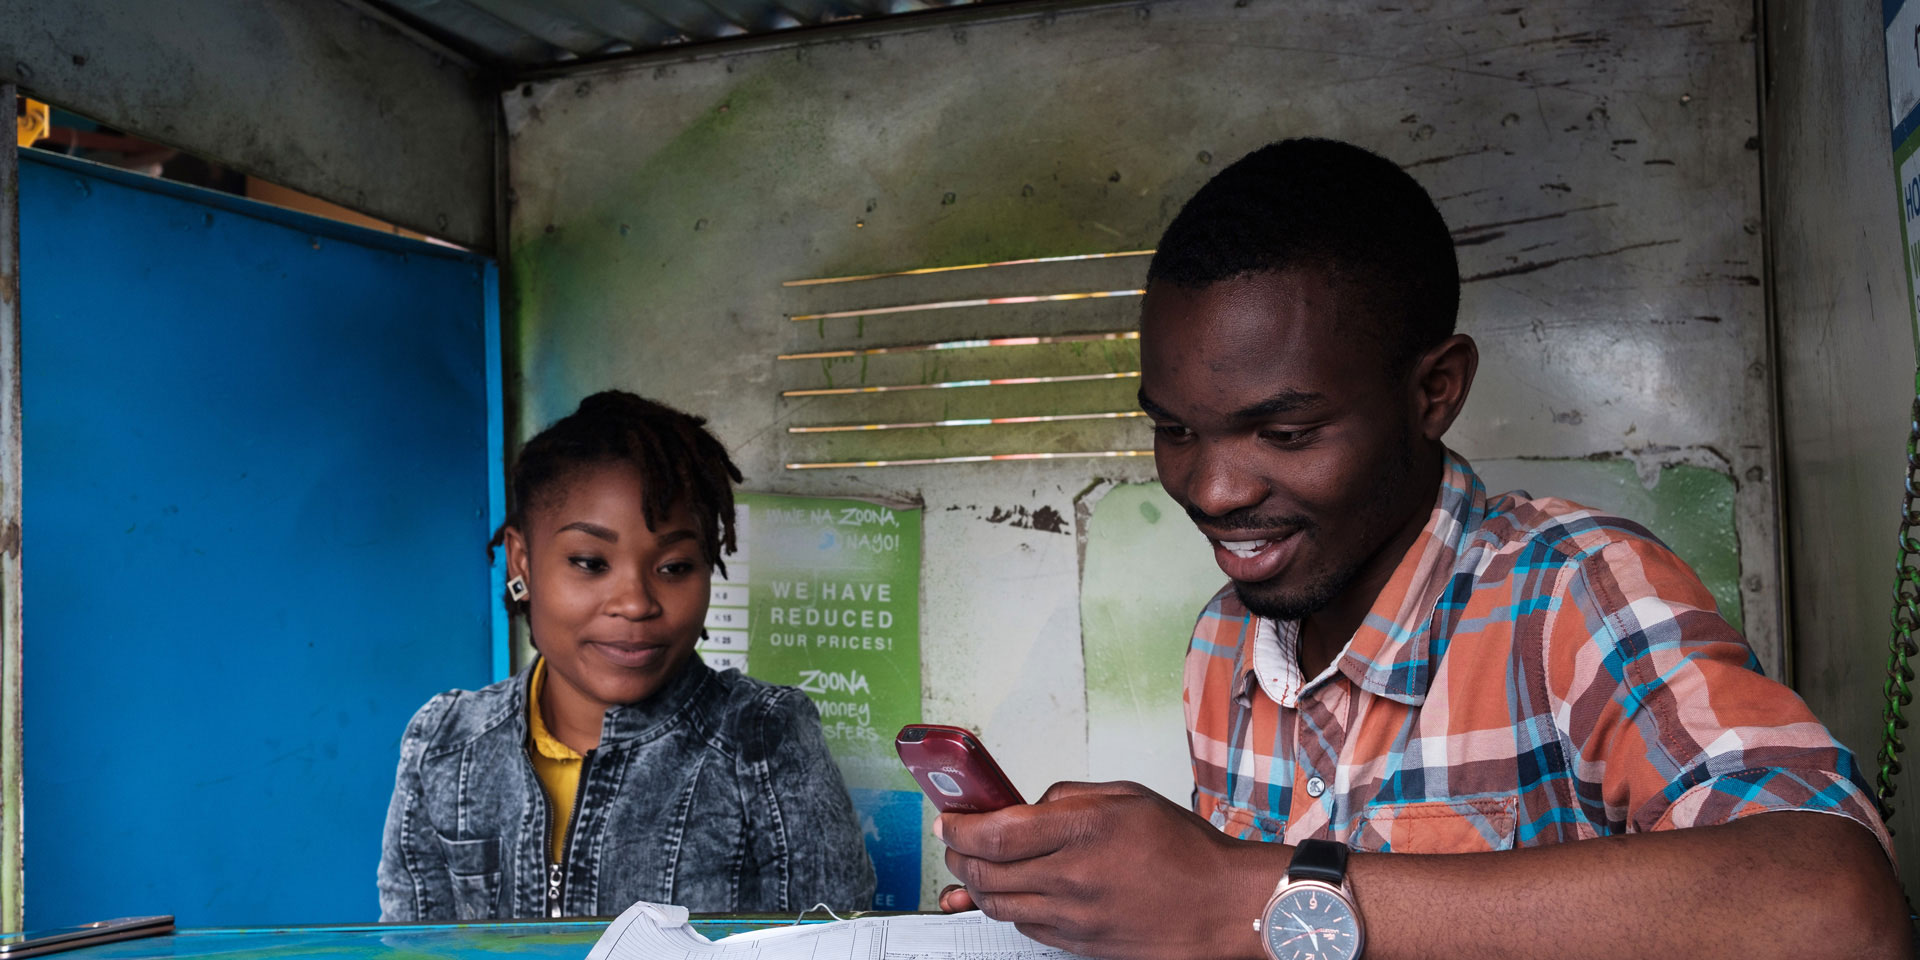 The 2023 GSMA report shows there are now 315 live mobile money deployments across the globe, with peer to peer (P2P) transfers and cash-in/cash-out transactions still among the most popular use cases